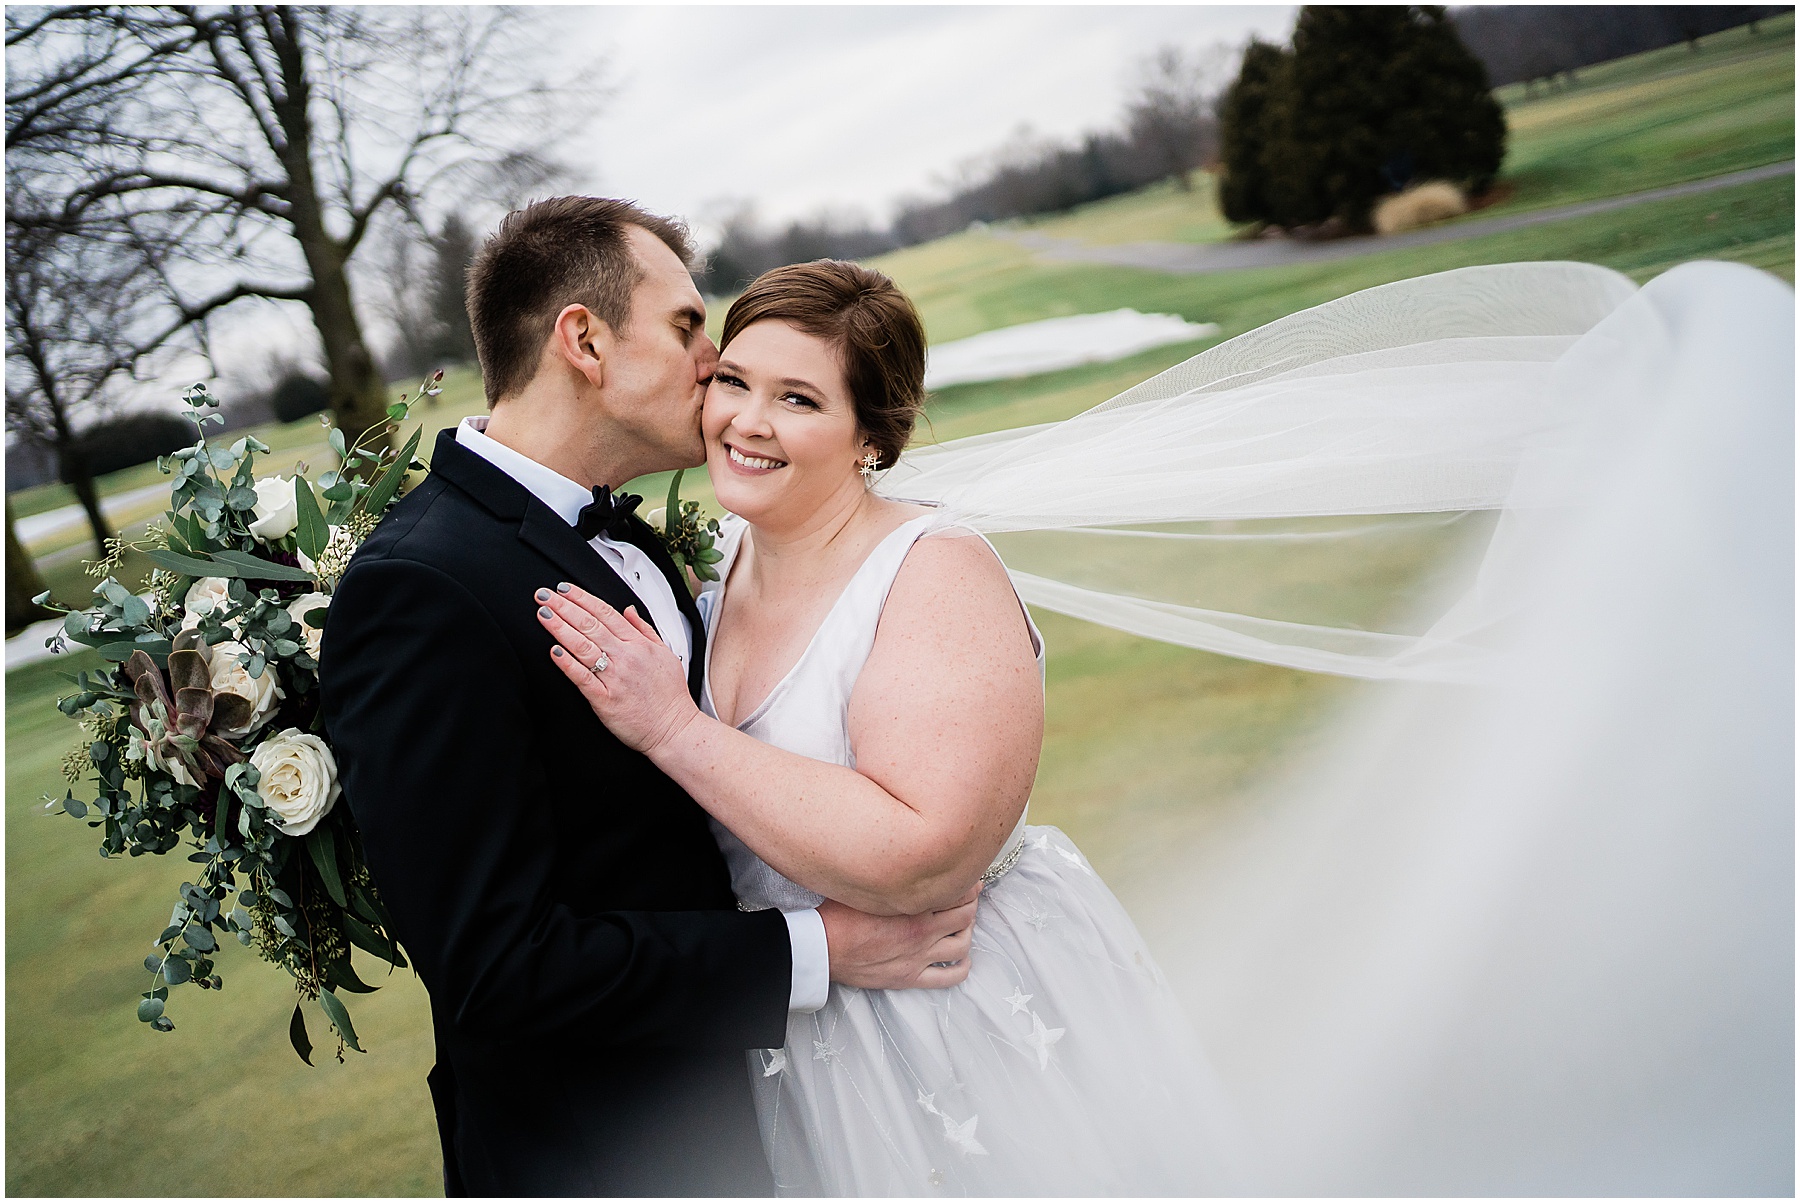 groom kissing his bride on the cheek as she smiles at the camera while her veil blows in the wind at Fort Wayne wedding venue